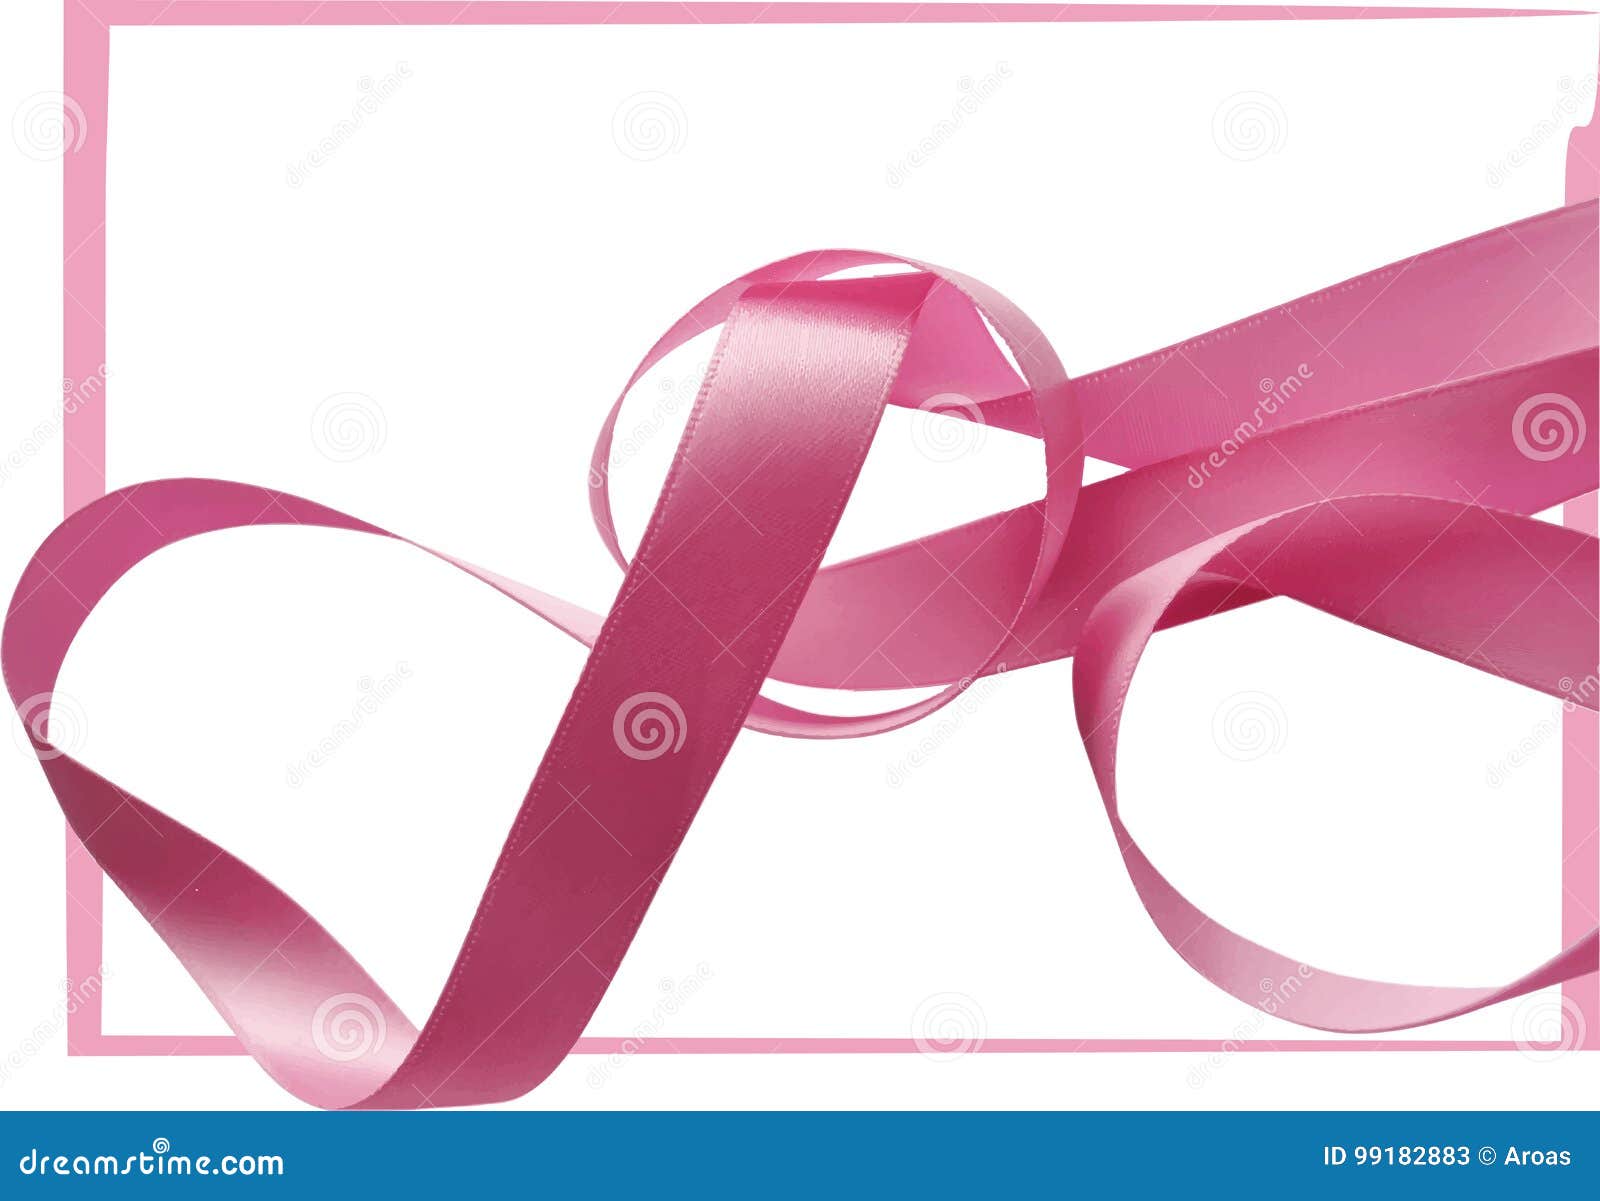 Pink Ribbon Over White Background Design Element Stock Vector